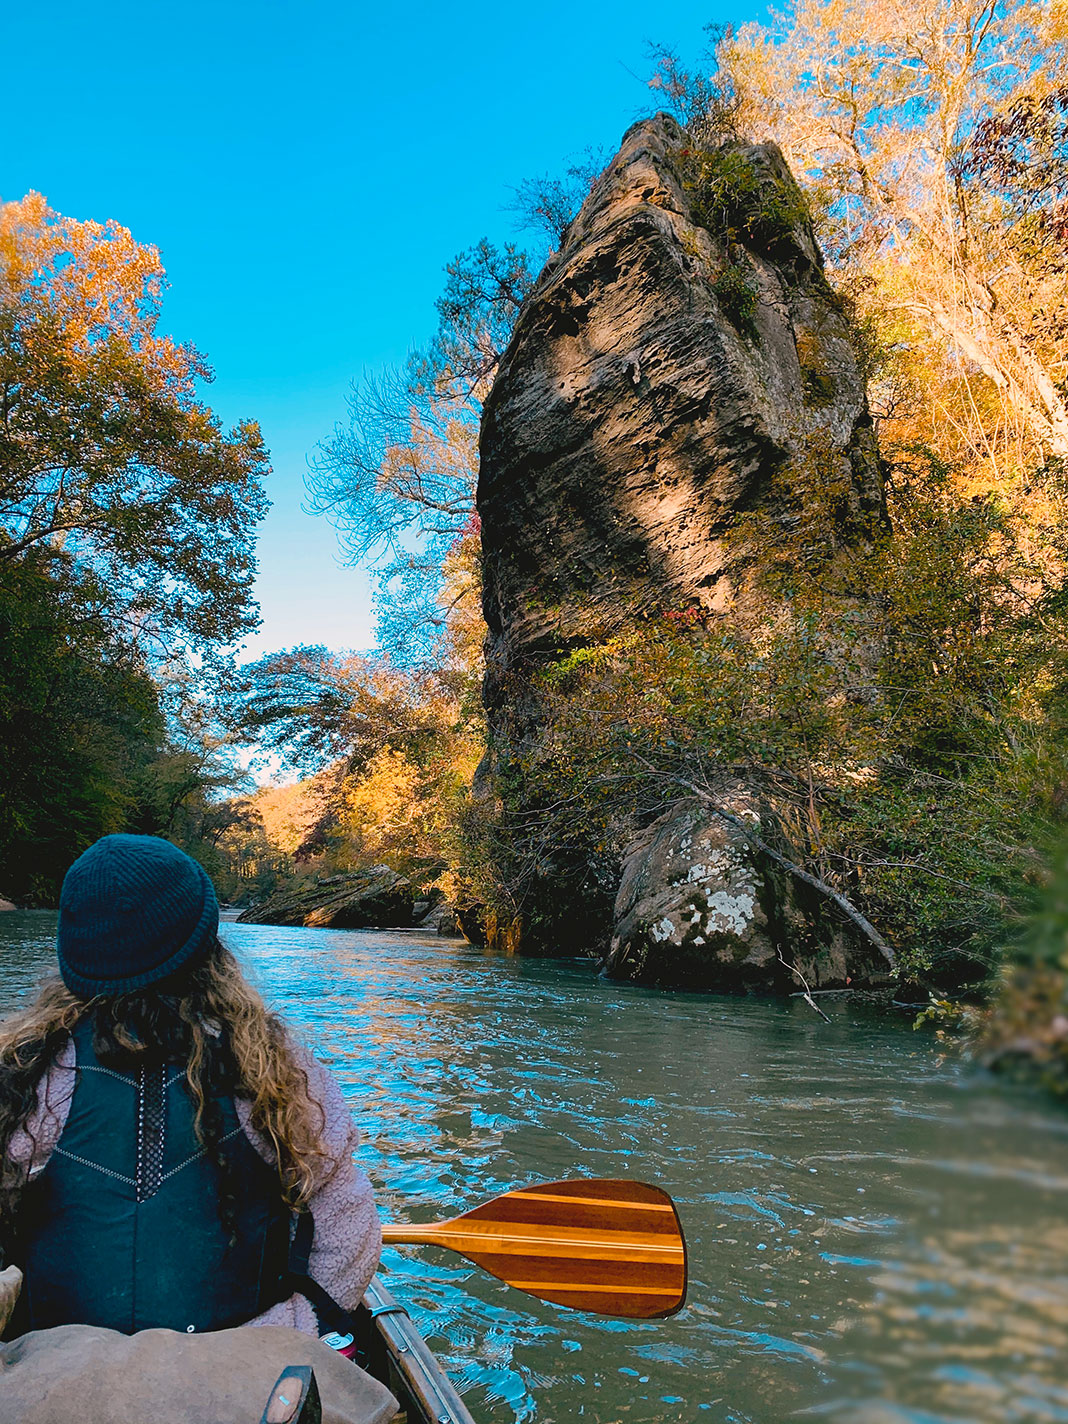 Woman sits in bow of canoe holding a paddle and looking up at a rock formation next to the river.